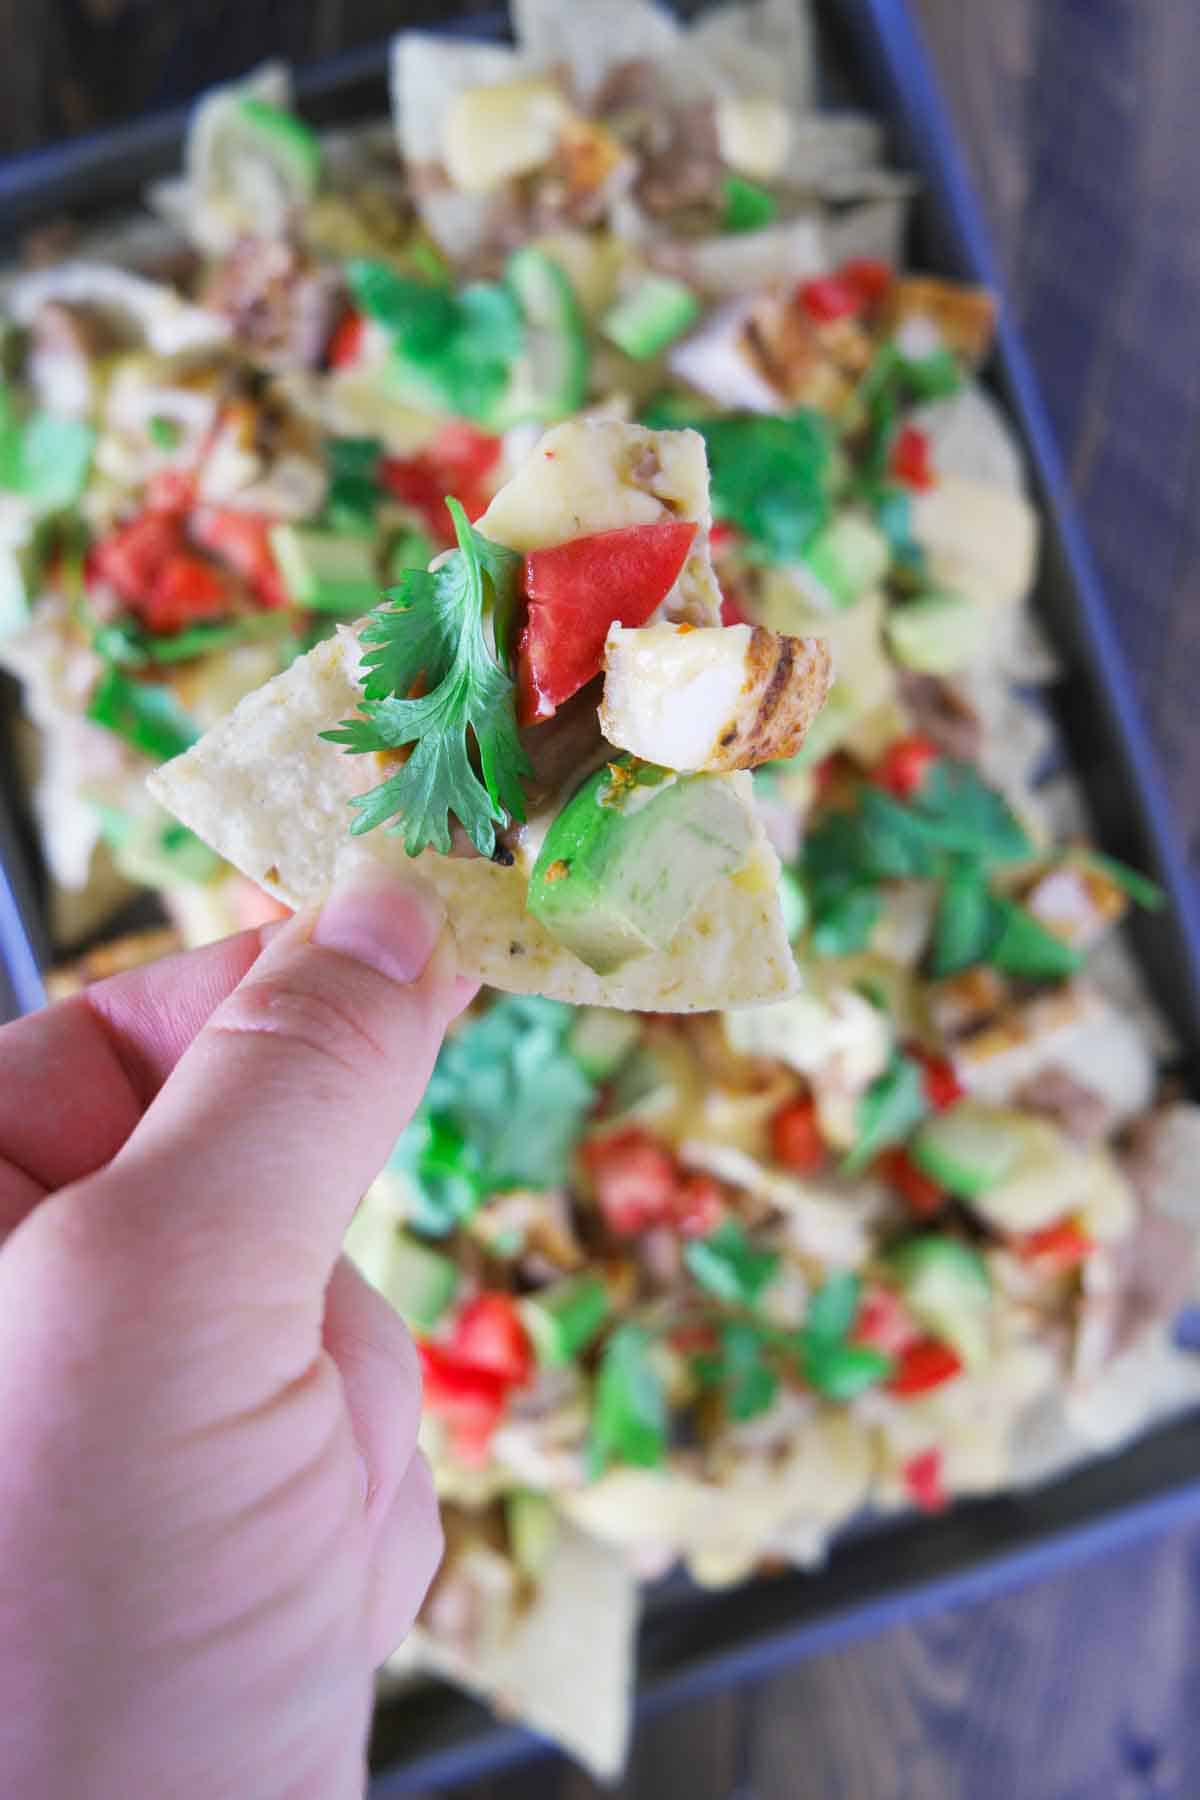 Grilled chicken nachos with a homemade cheese sauce